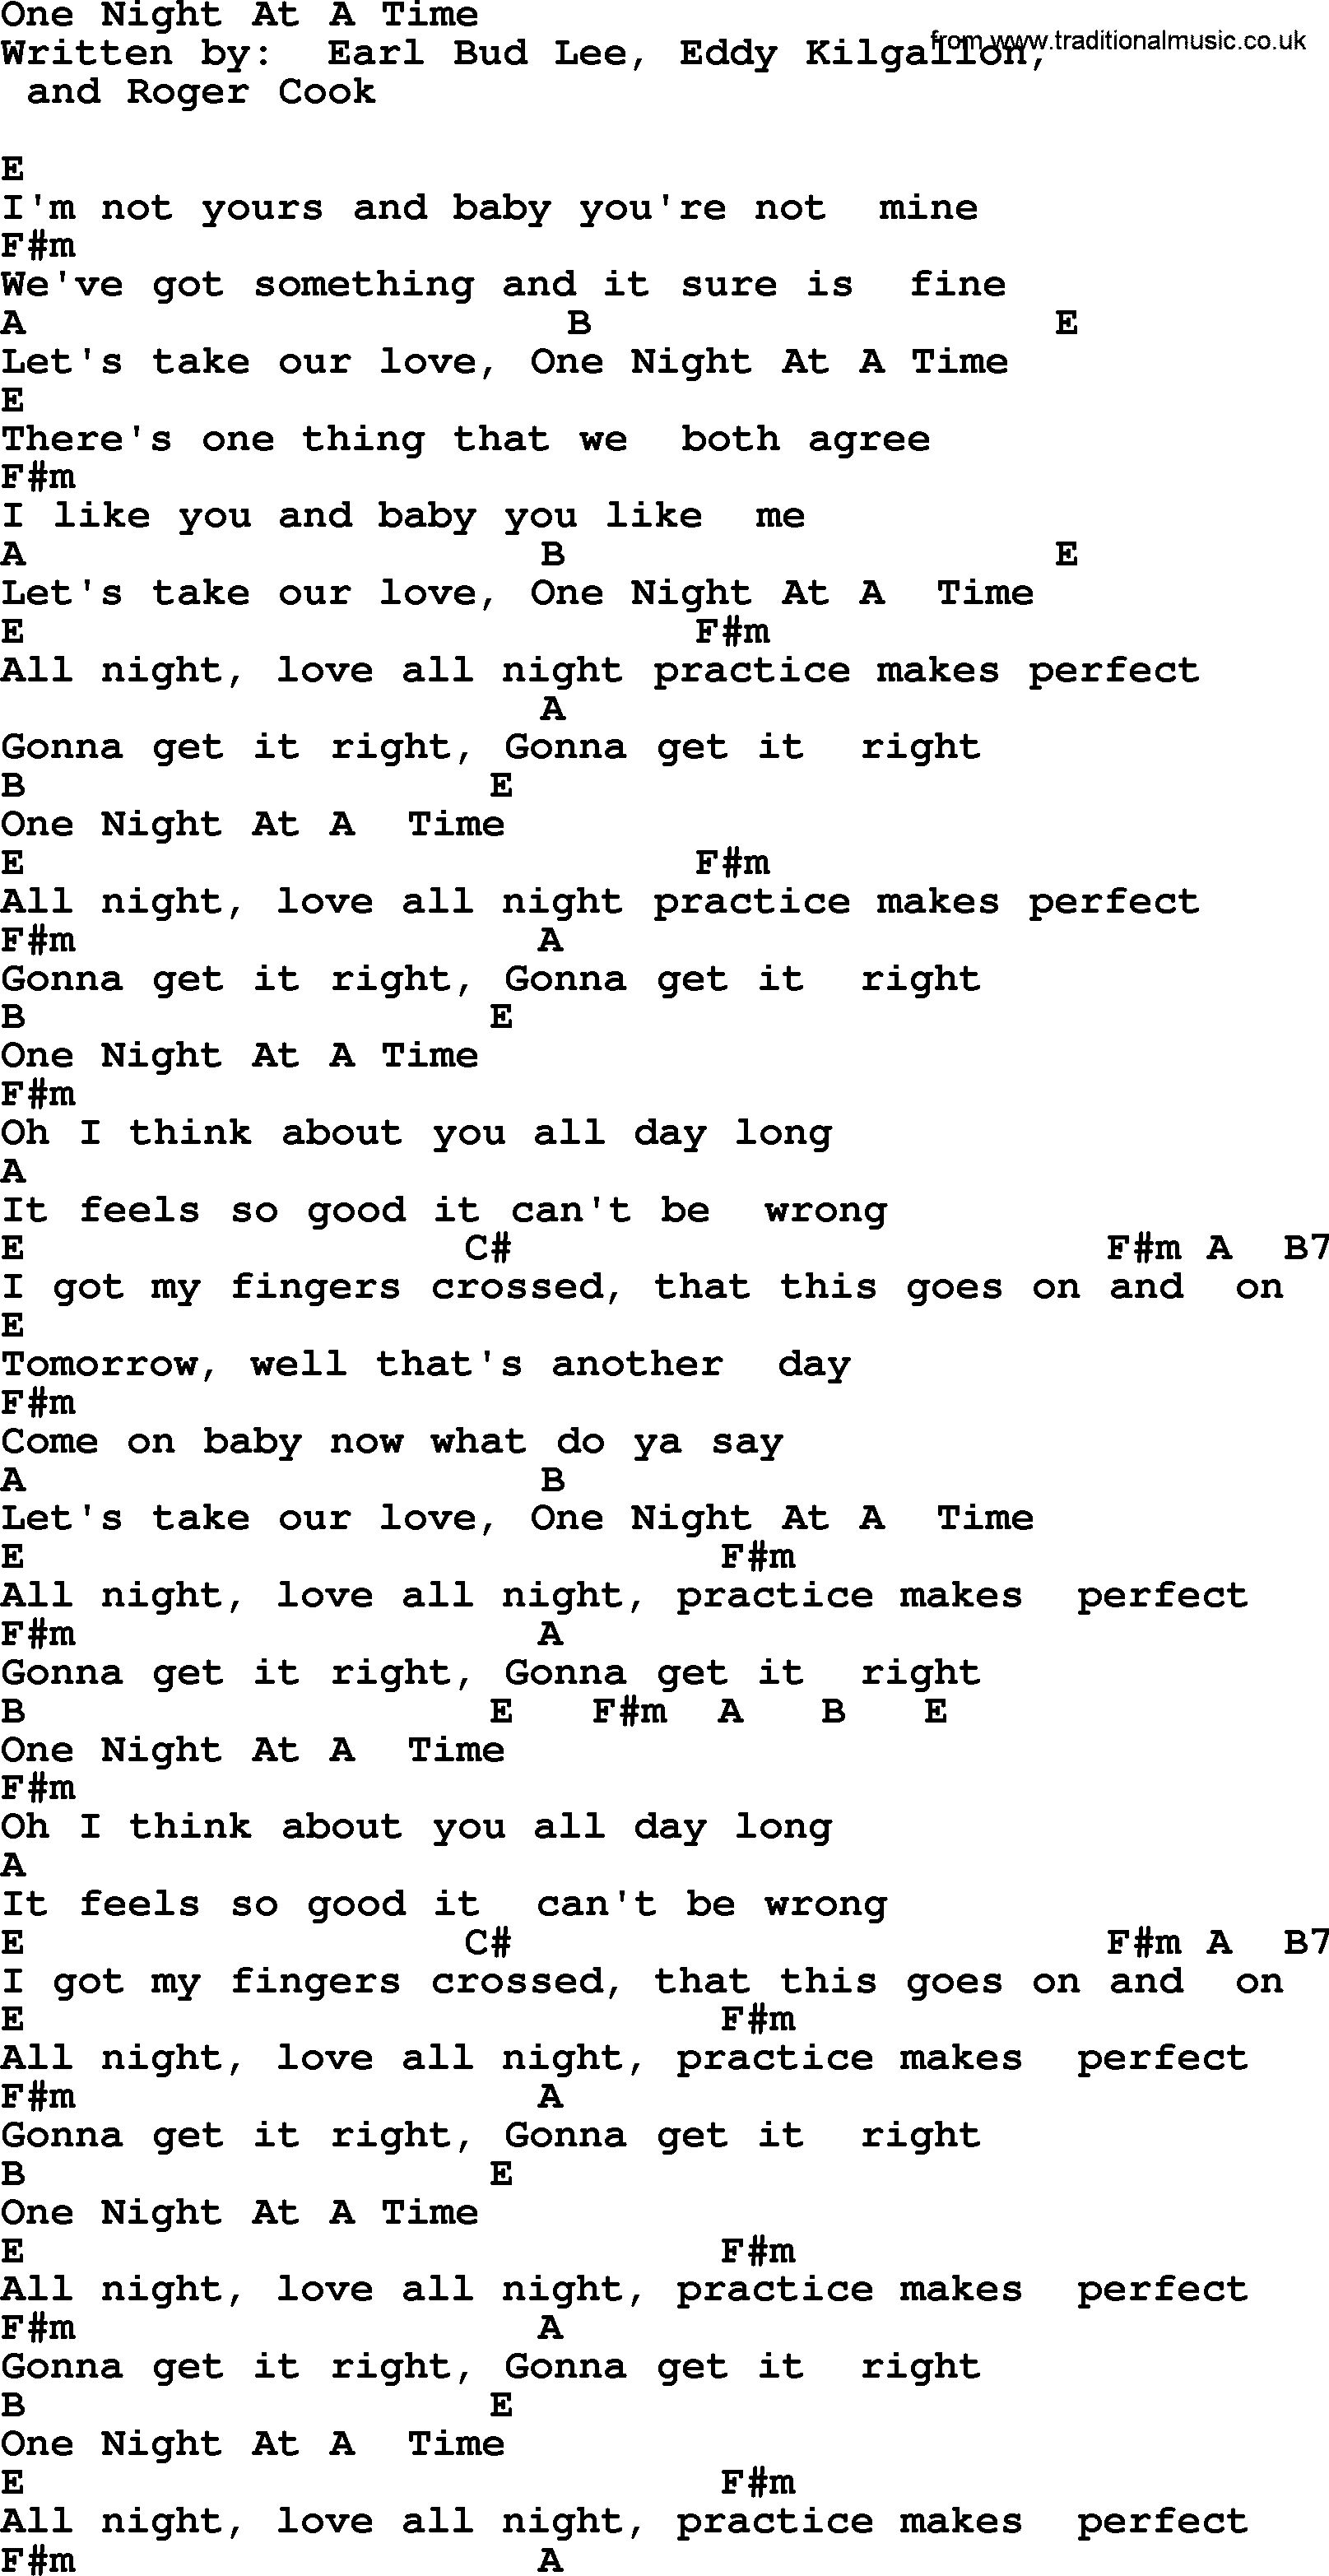 George Strait song: One Night At A Time, lyrics and chords